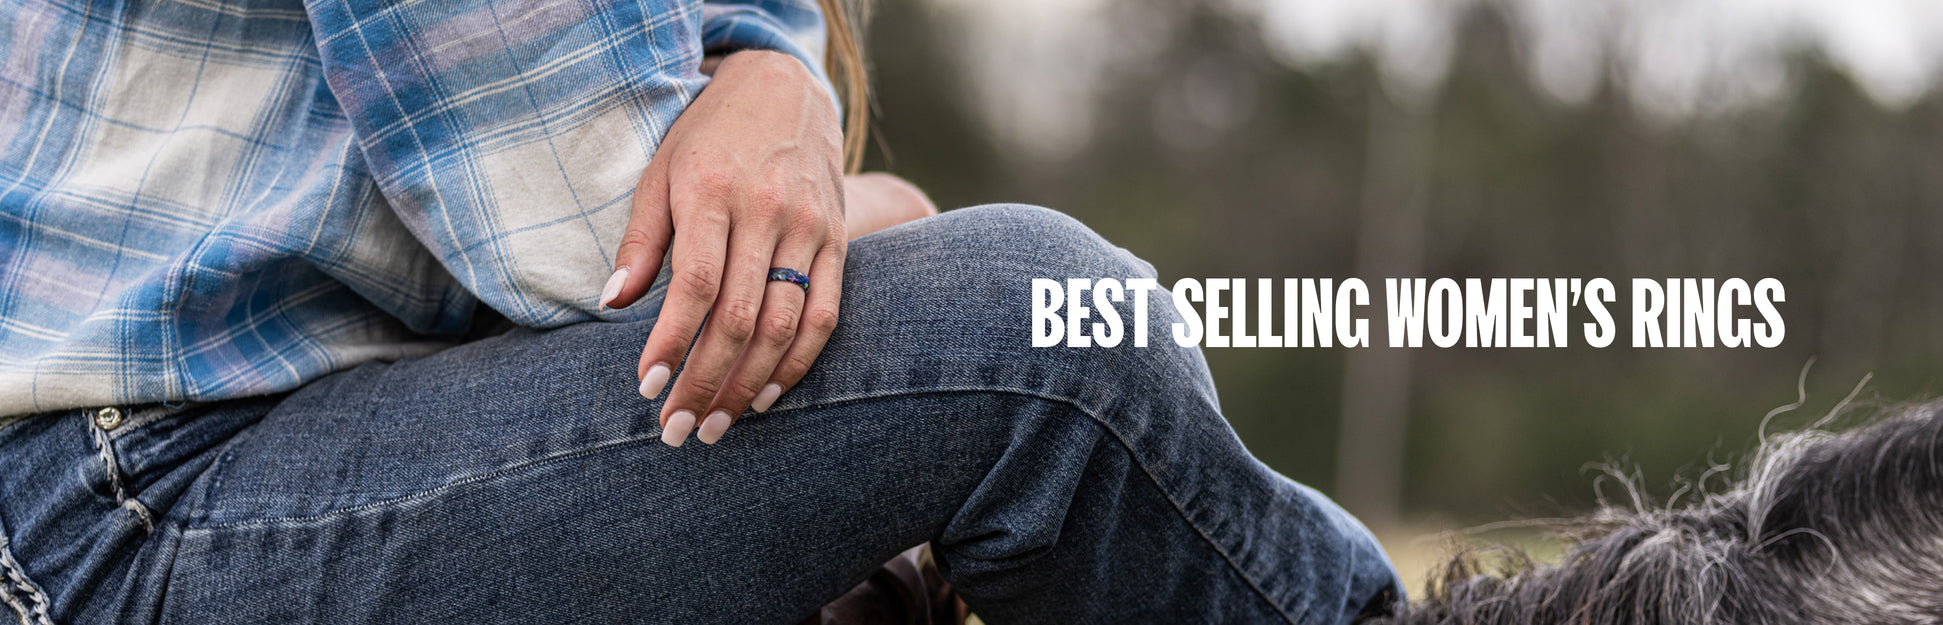 Best Selling Women's Rings, women holding the hatch of her car up with mountains in the background